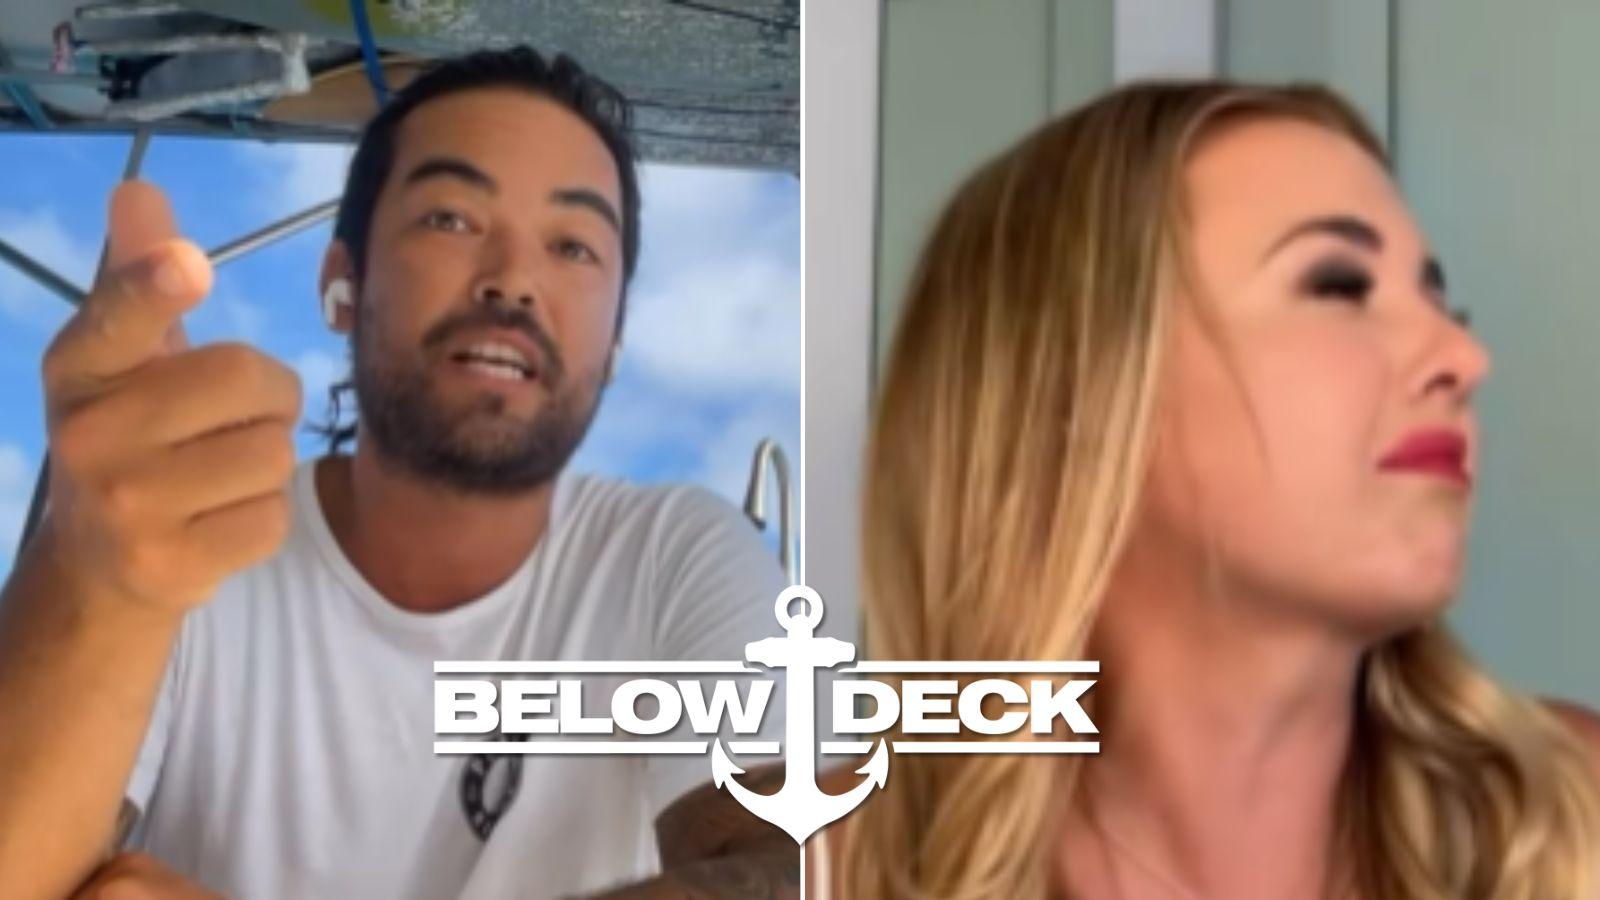 Below Deck Sailing Yacht's Colin and Daisy